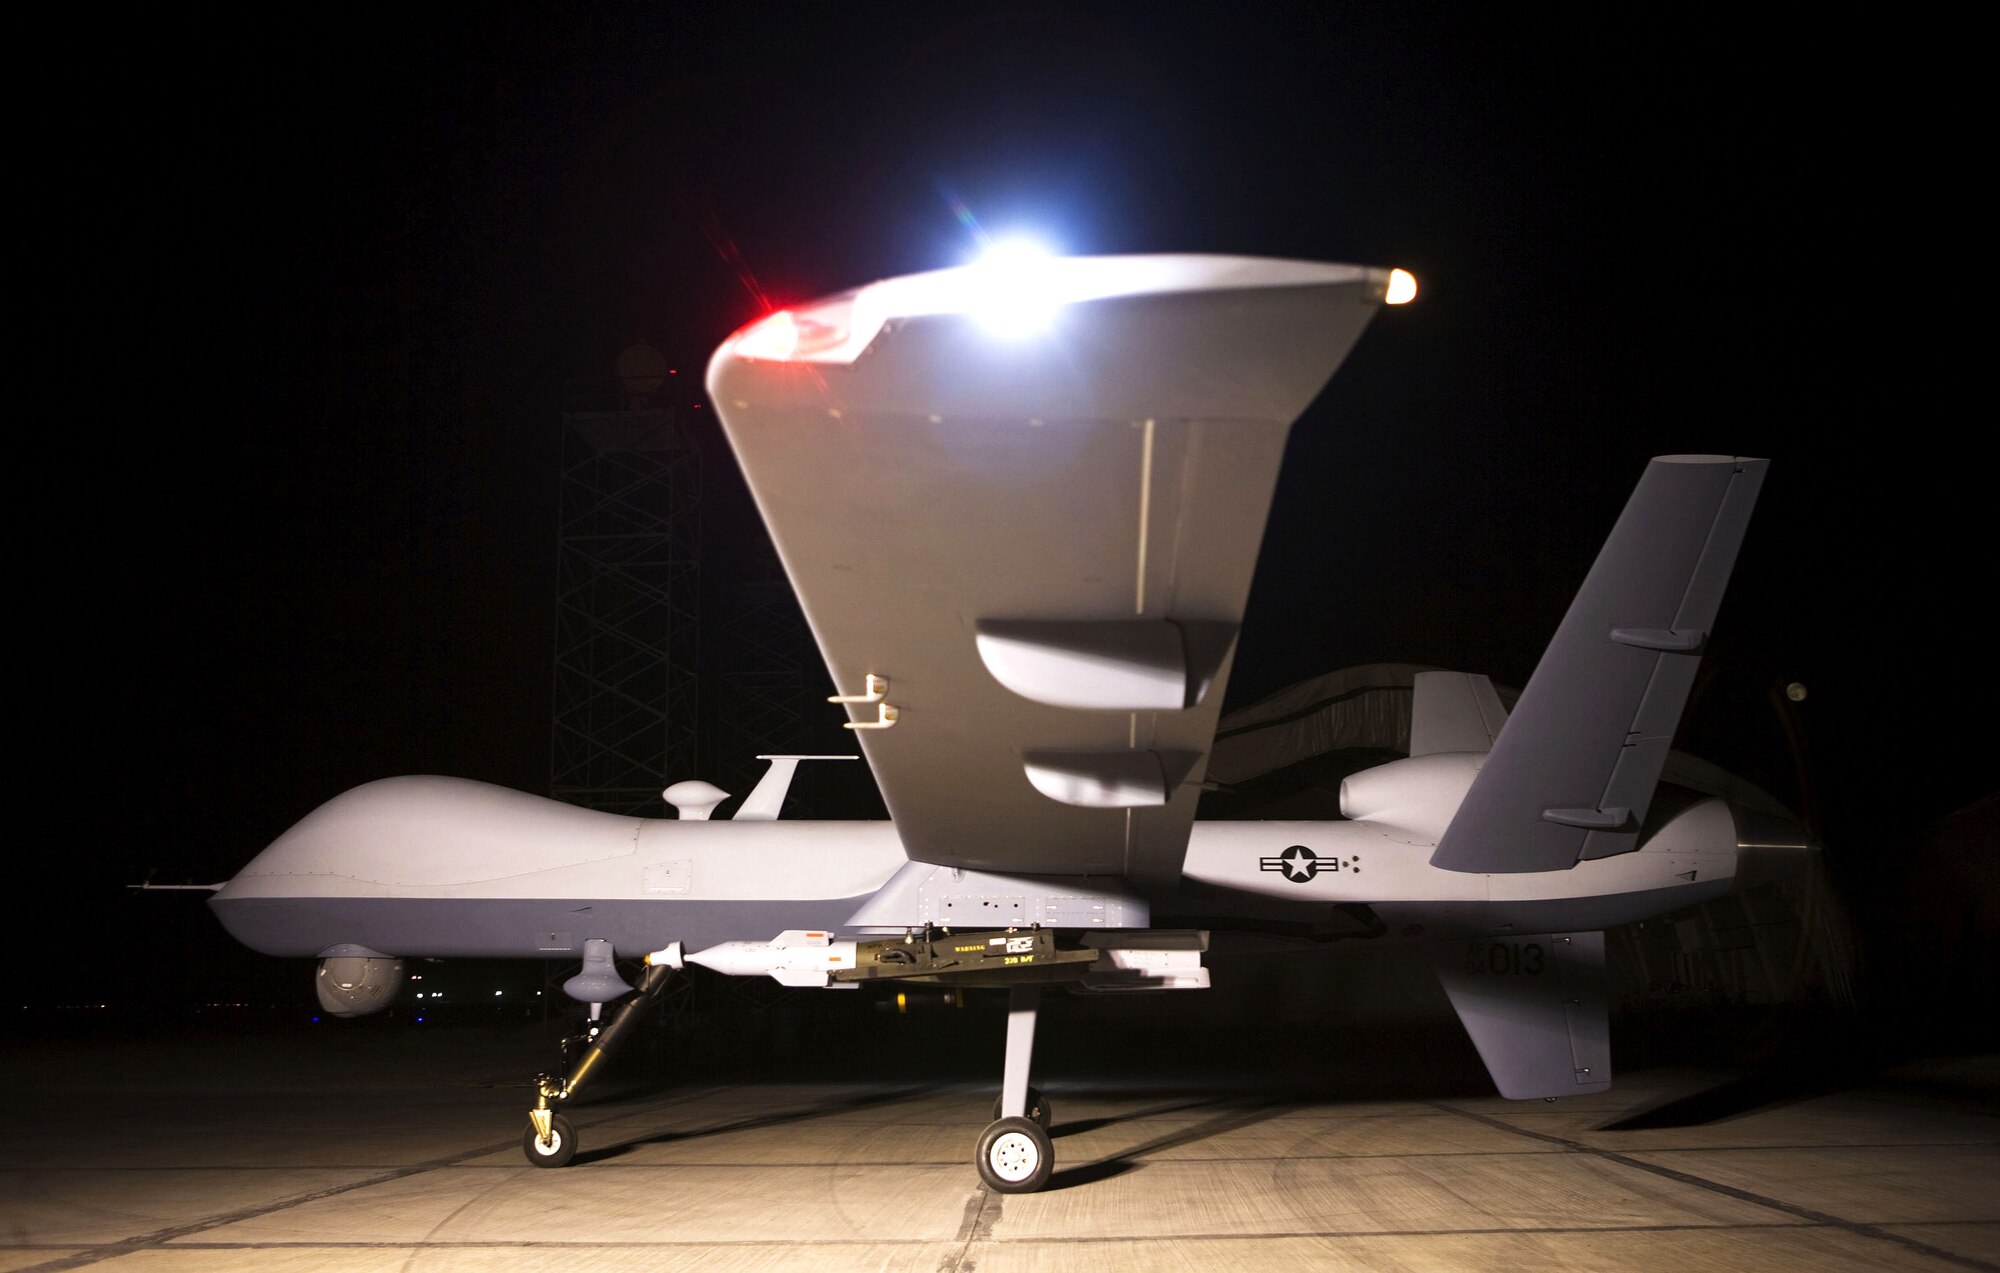 An MQ-9 Reaper sits on a ramp in Afghanistan. Larger and more powerful than the MQ-1 Predator, the Reaper is designed to go after time-sensitive targets with persistence and precision, and destroy or disable those targets (Courtesy Photo)